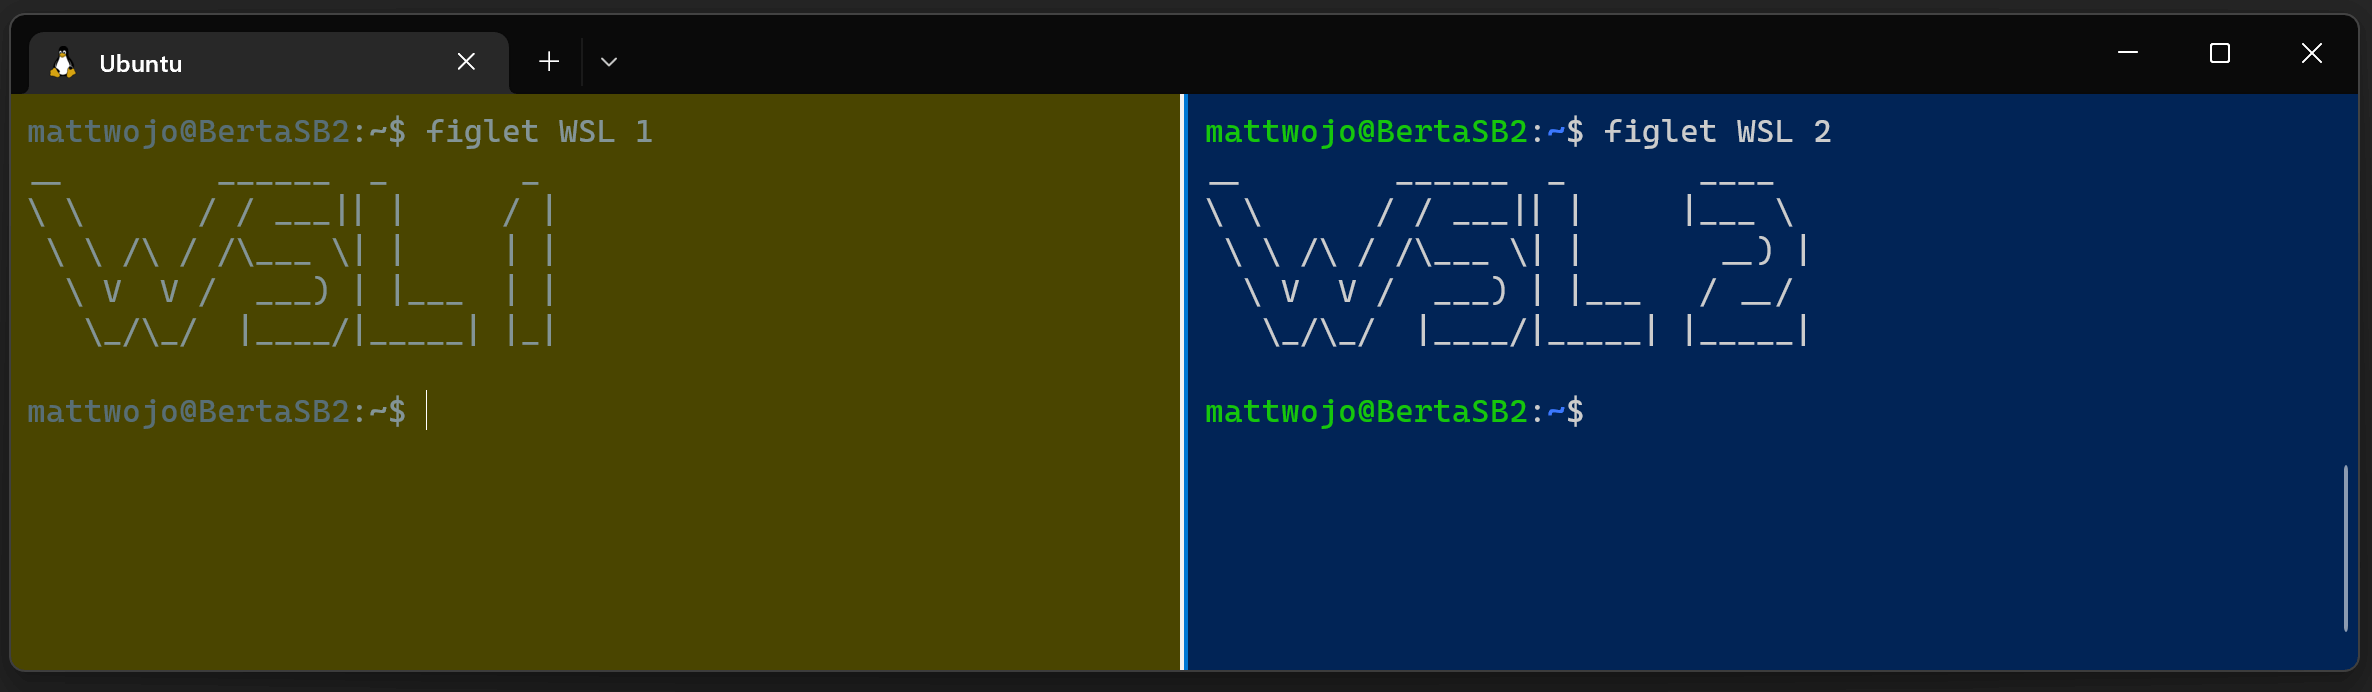 Screenshot of Ubuntu running on a WSL 1 architecture next to the same instance running on WSL 2.